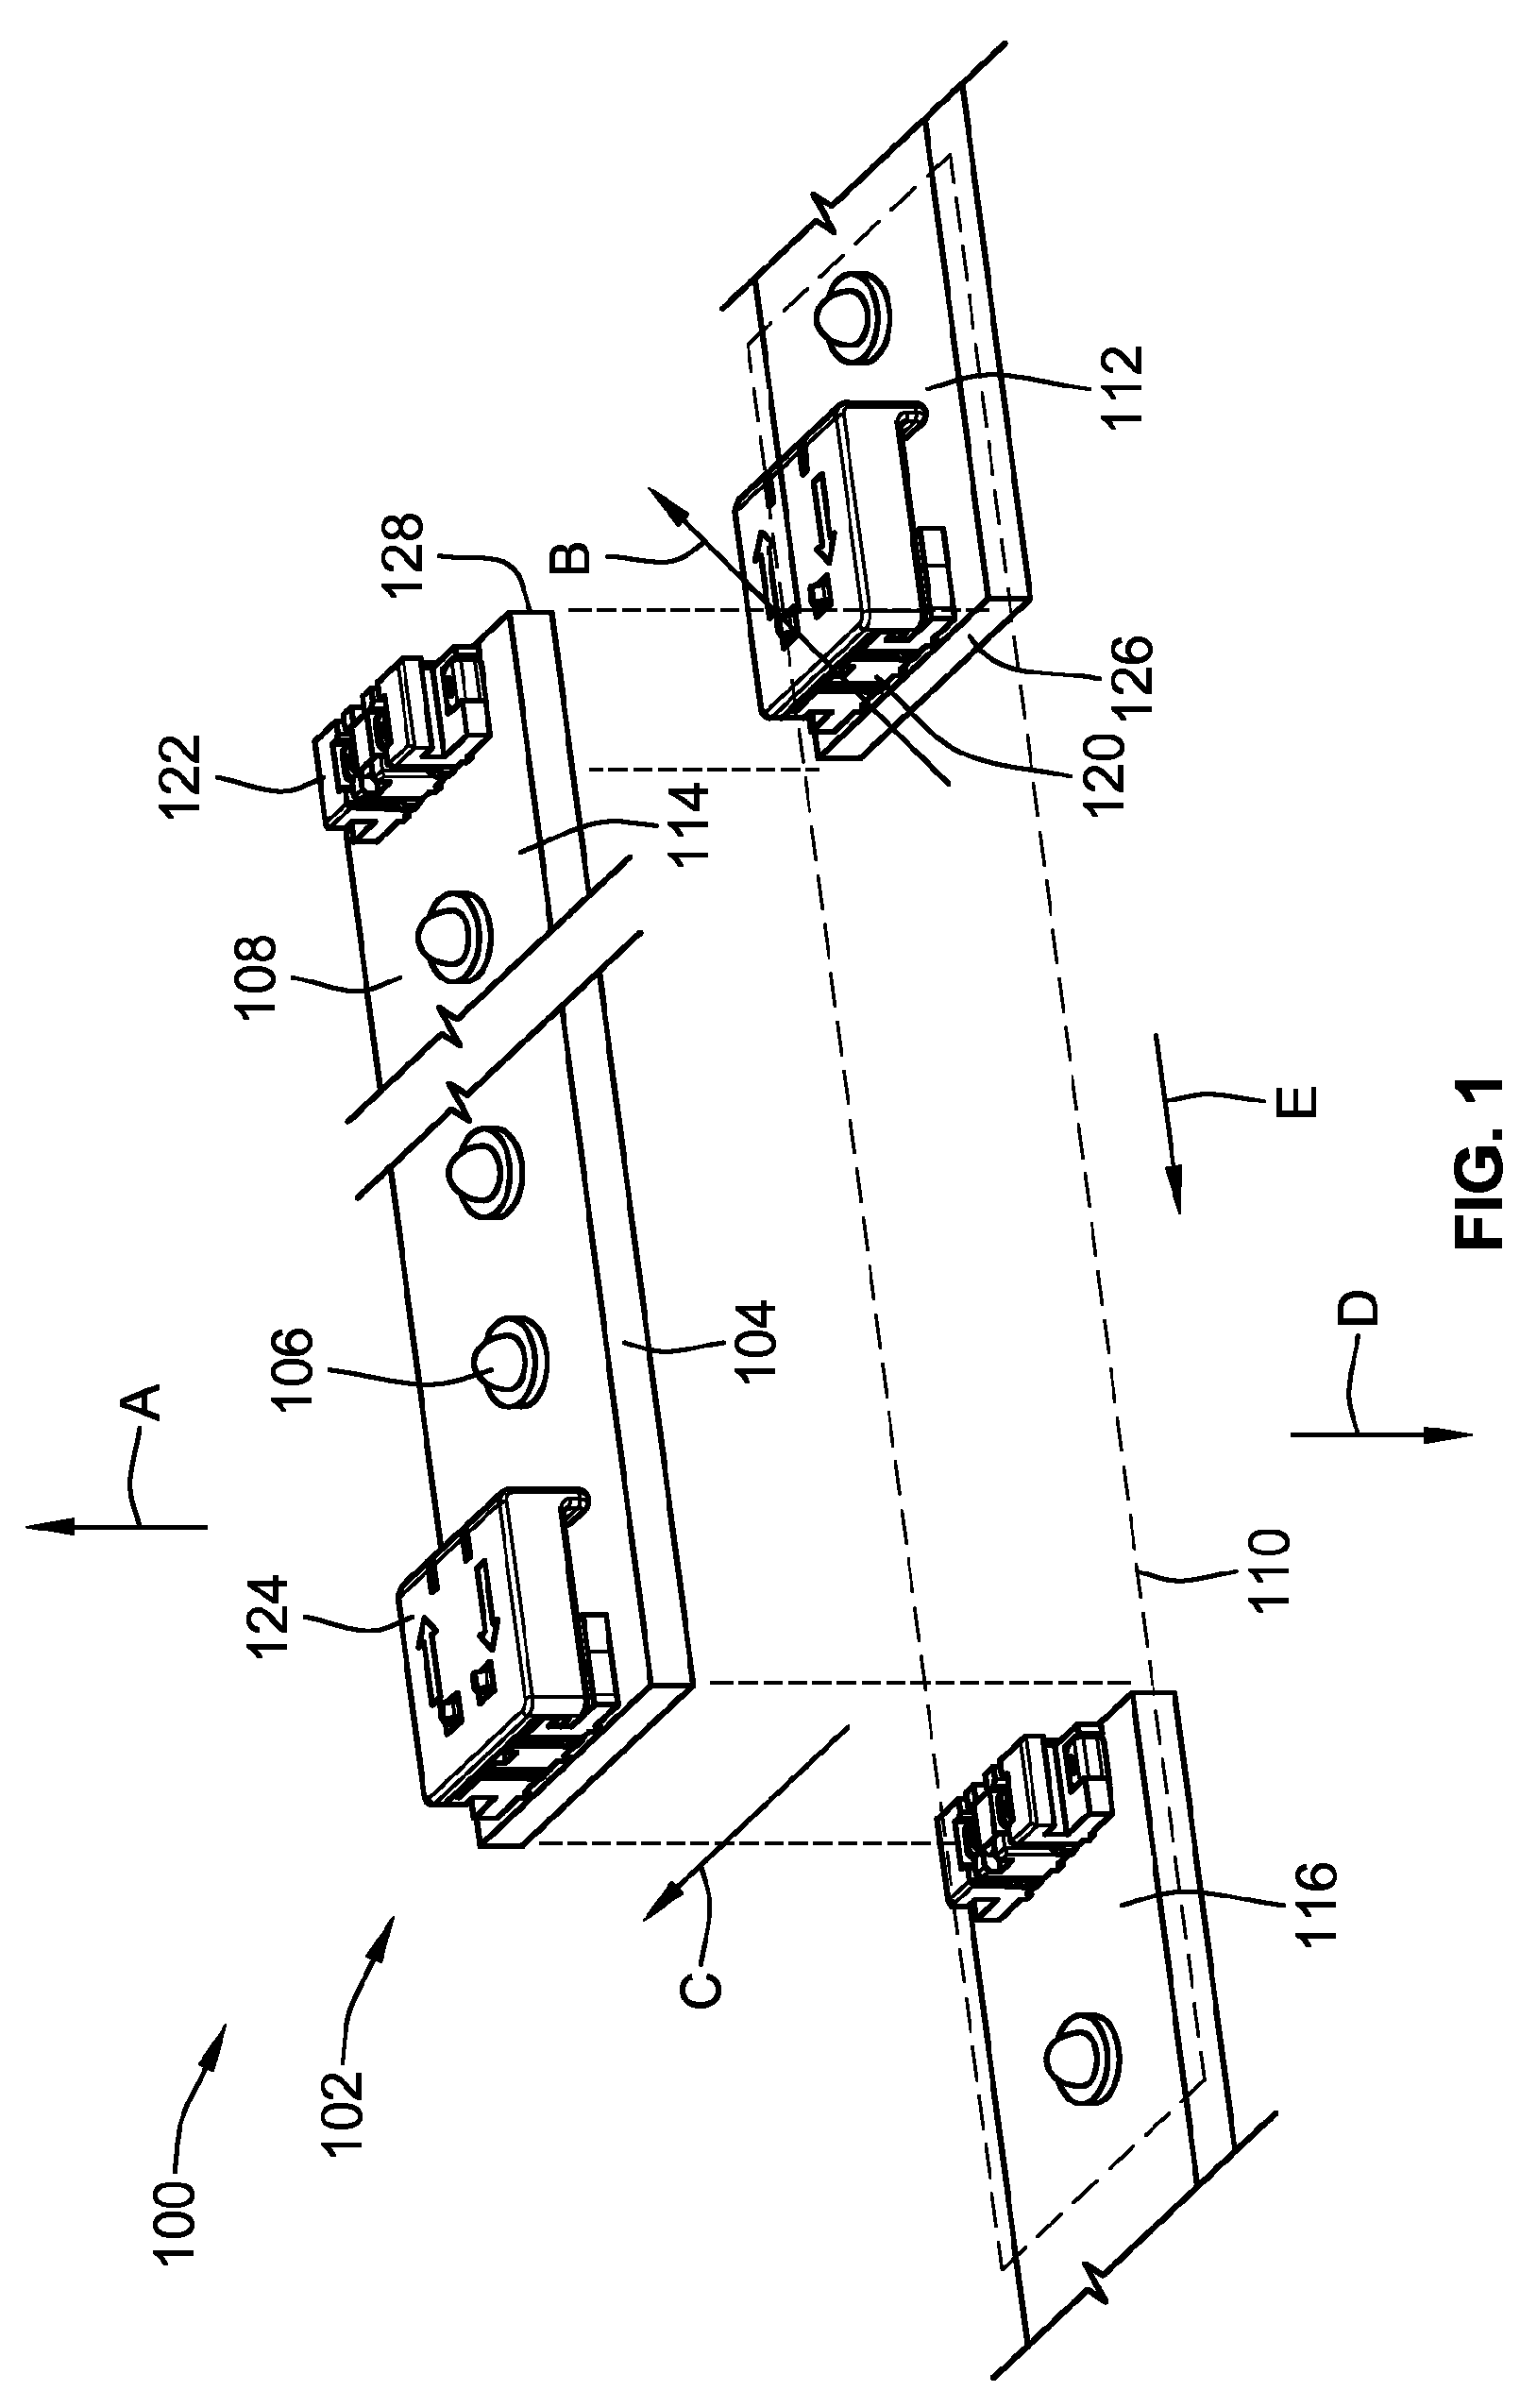 Board-to-board connector system